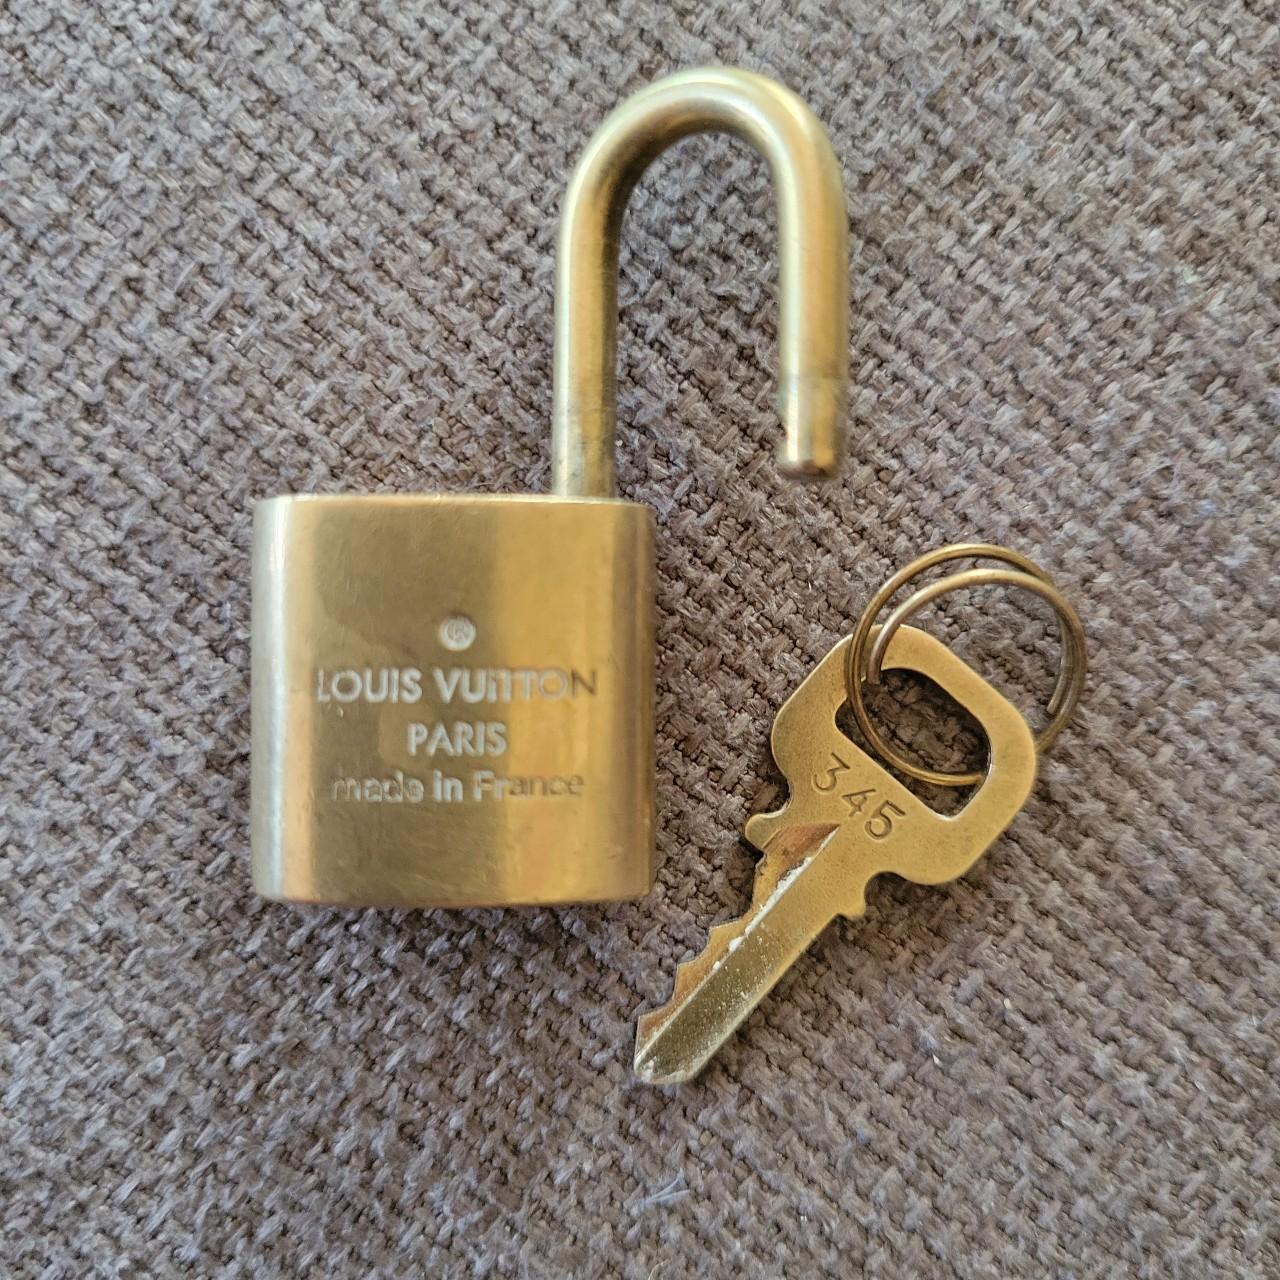 Louis Vuitton lock and key with an 18 non-branded - Depop